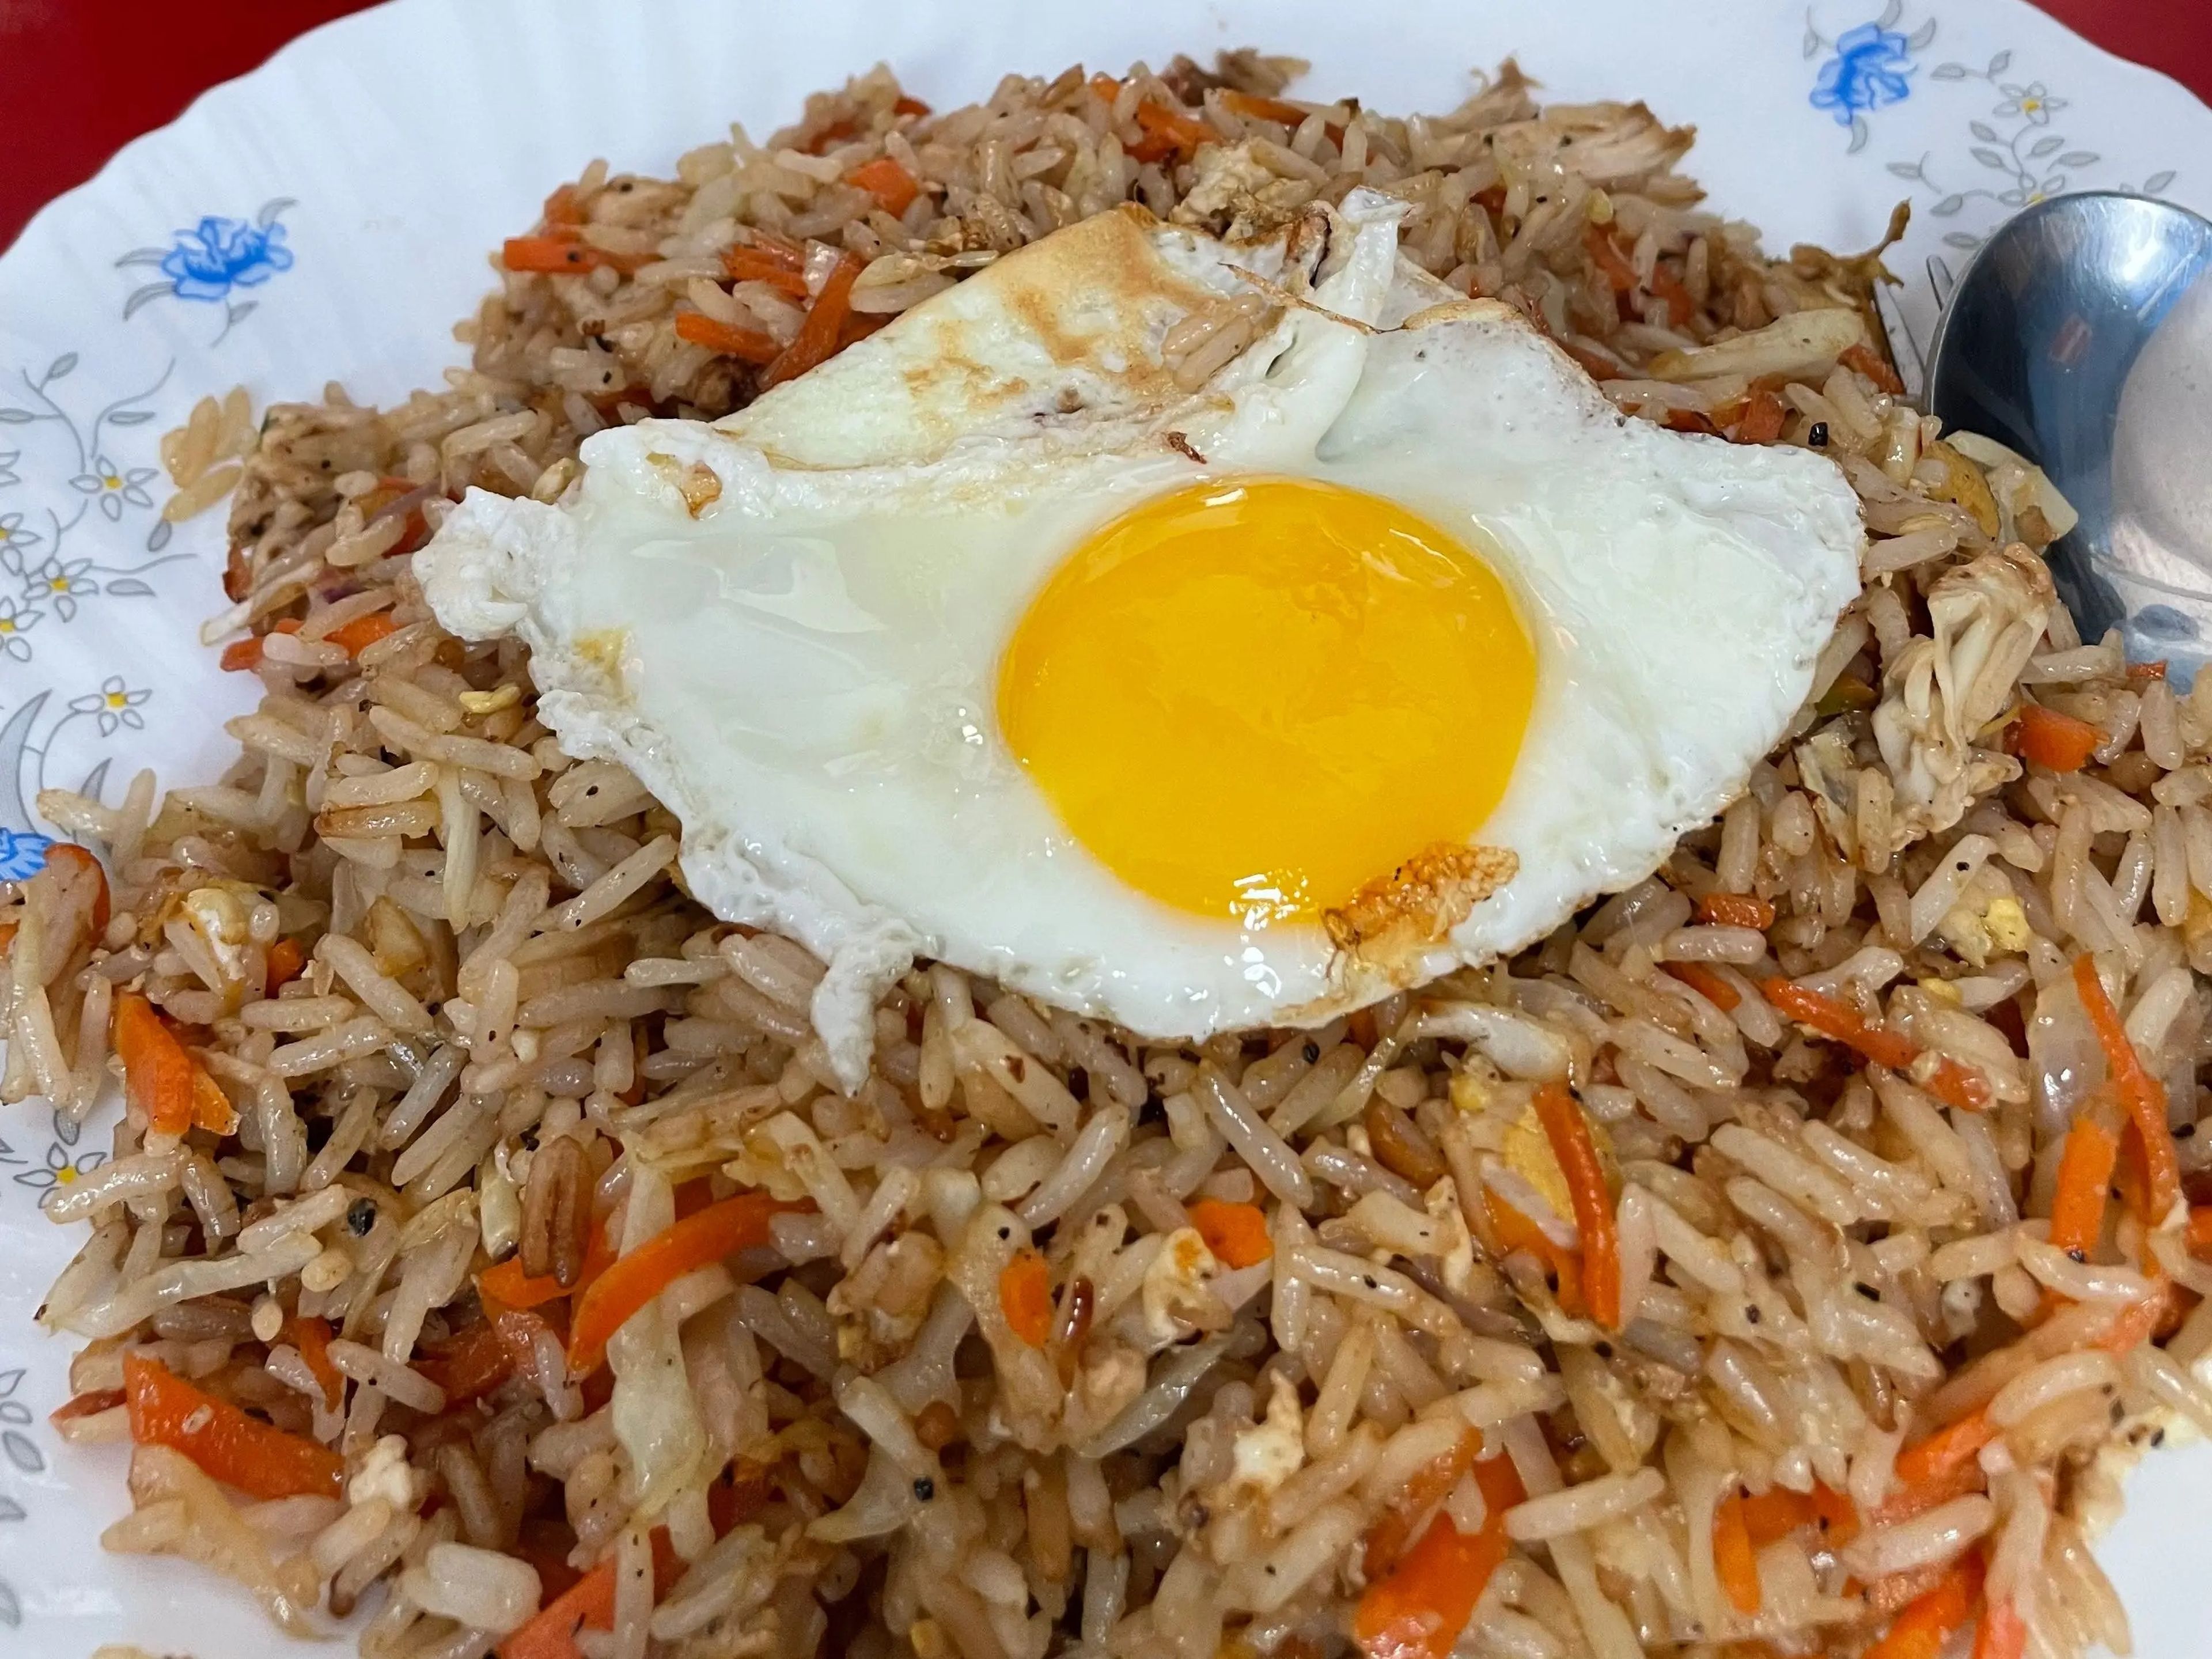 A plate of rice with a fried egg on top.